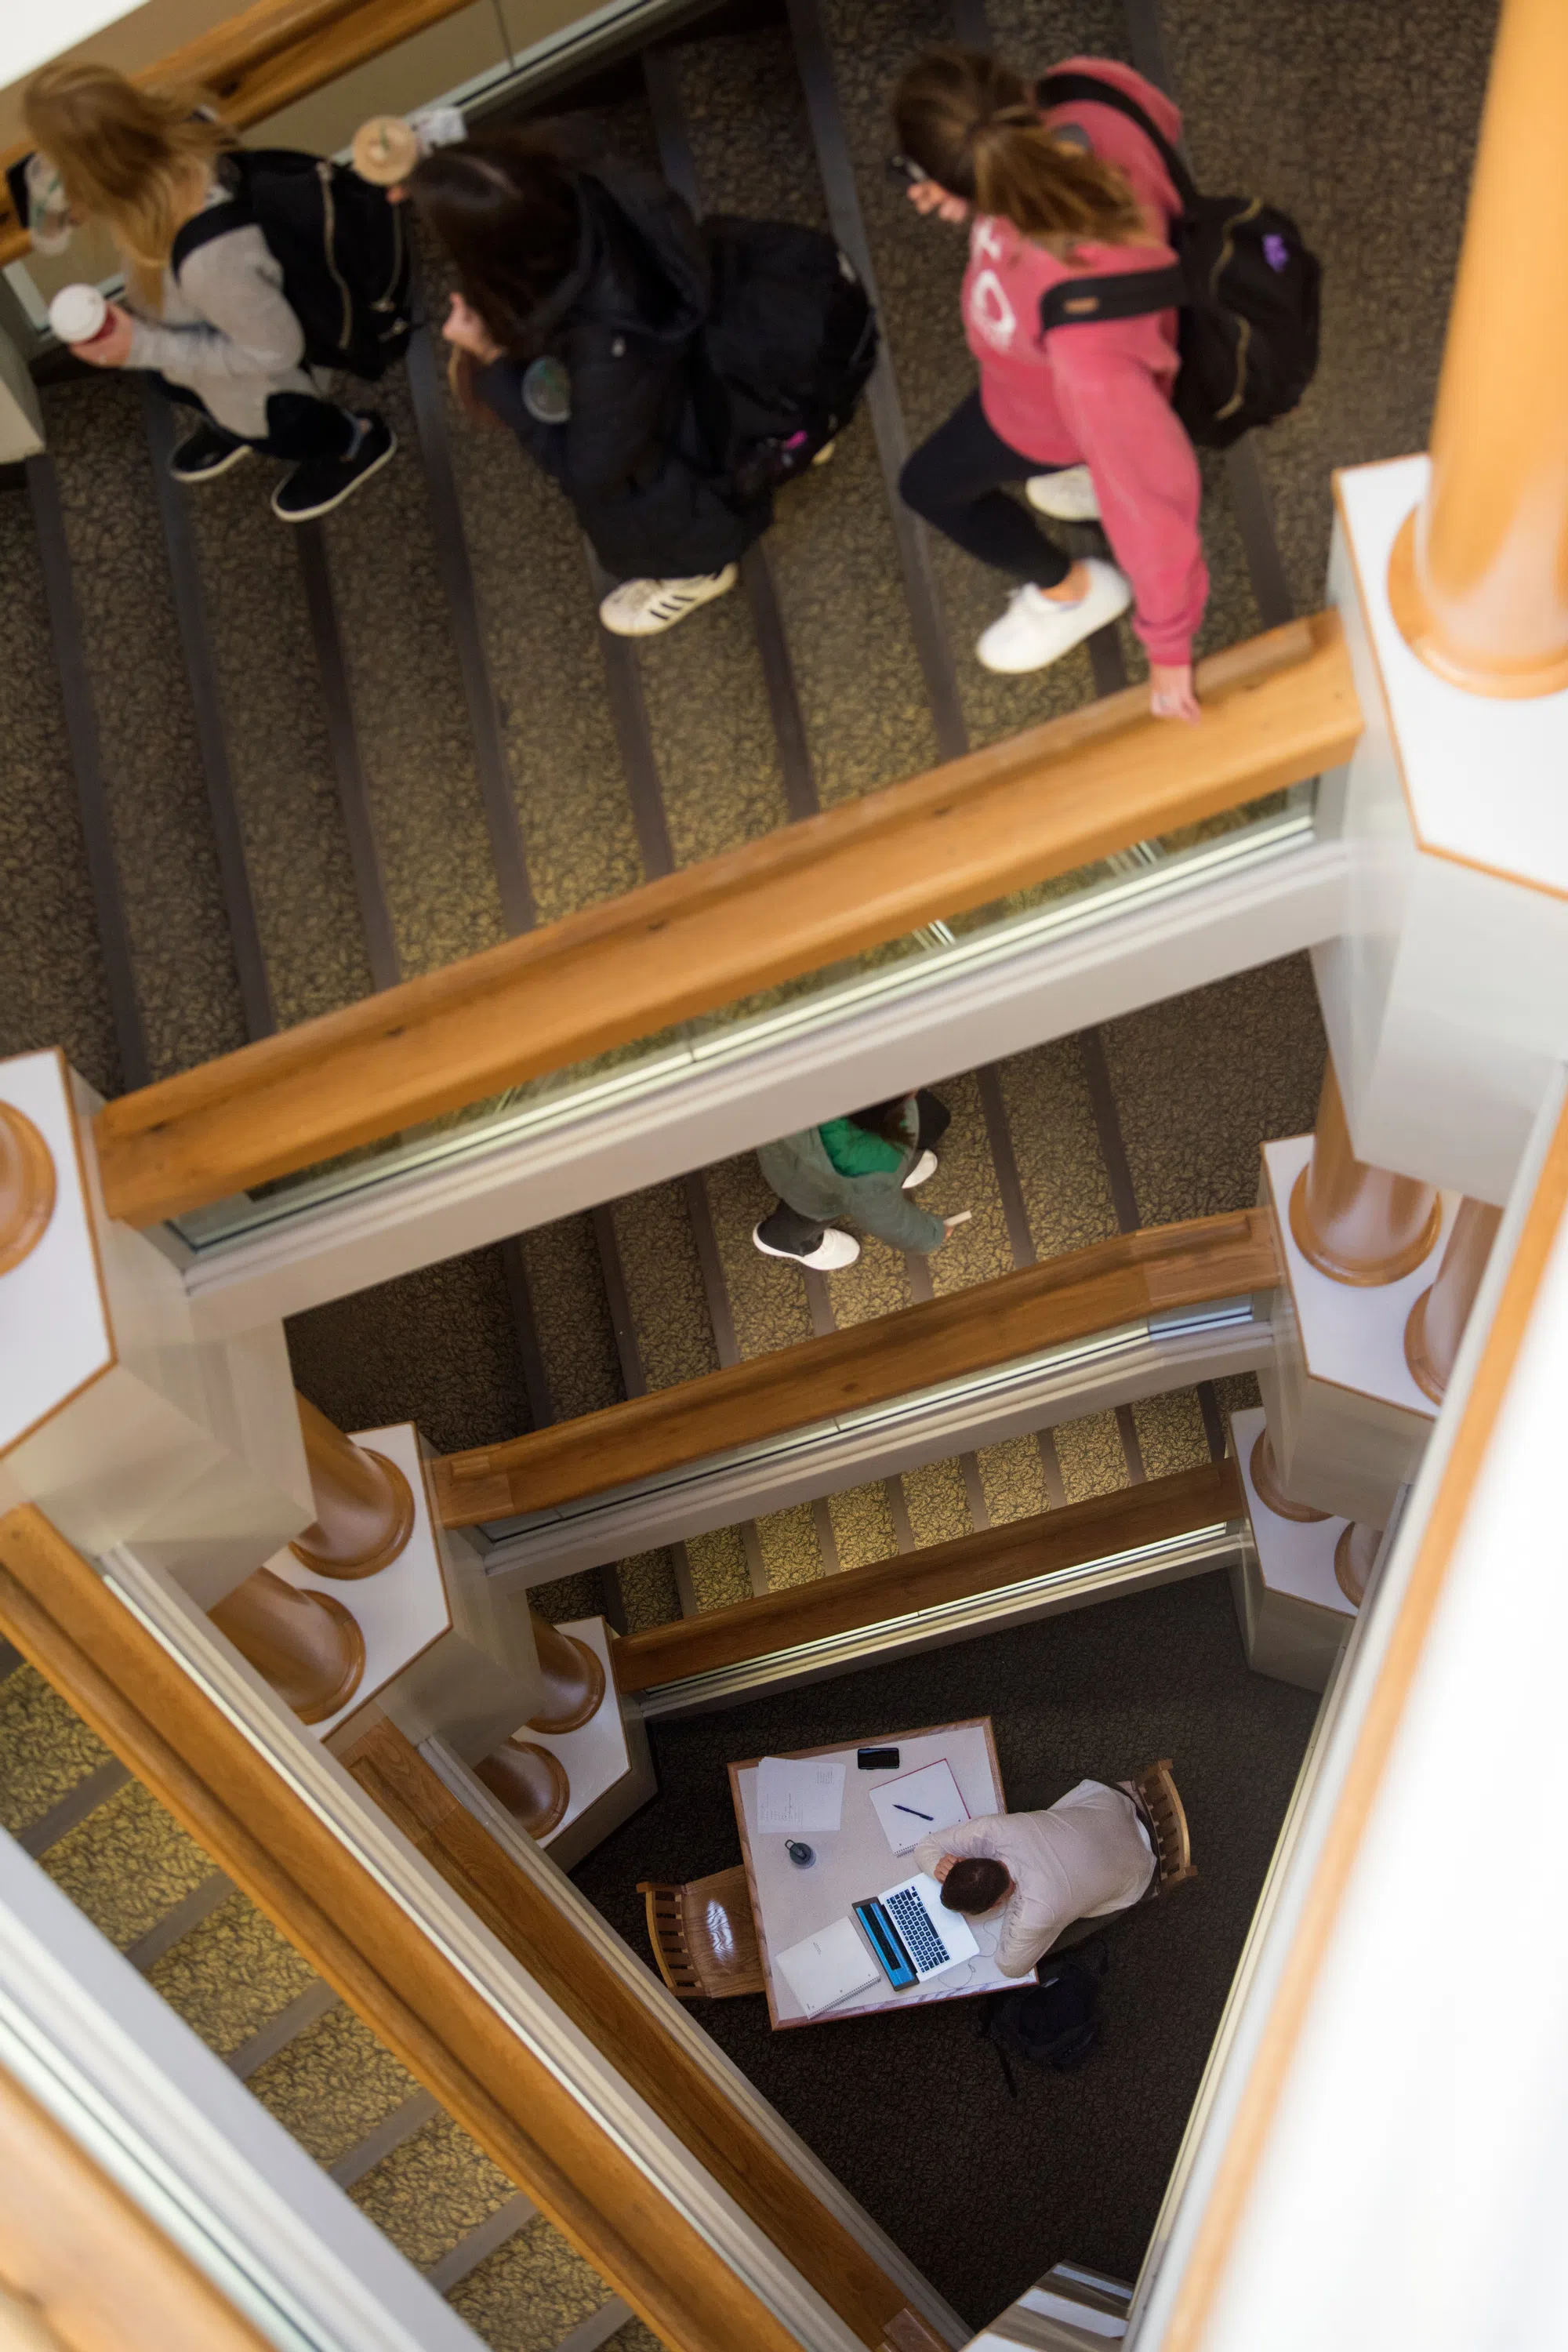 students walk staircase, with several stories visible, a student studying at a table at the bottom of the staircase